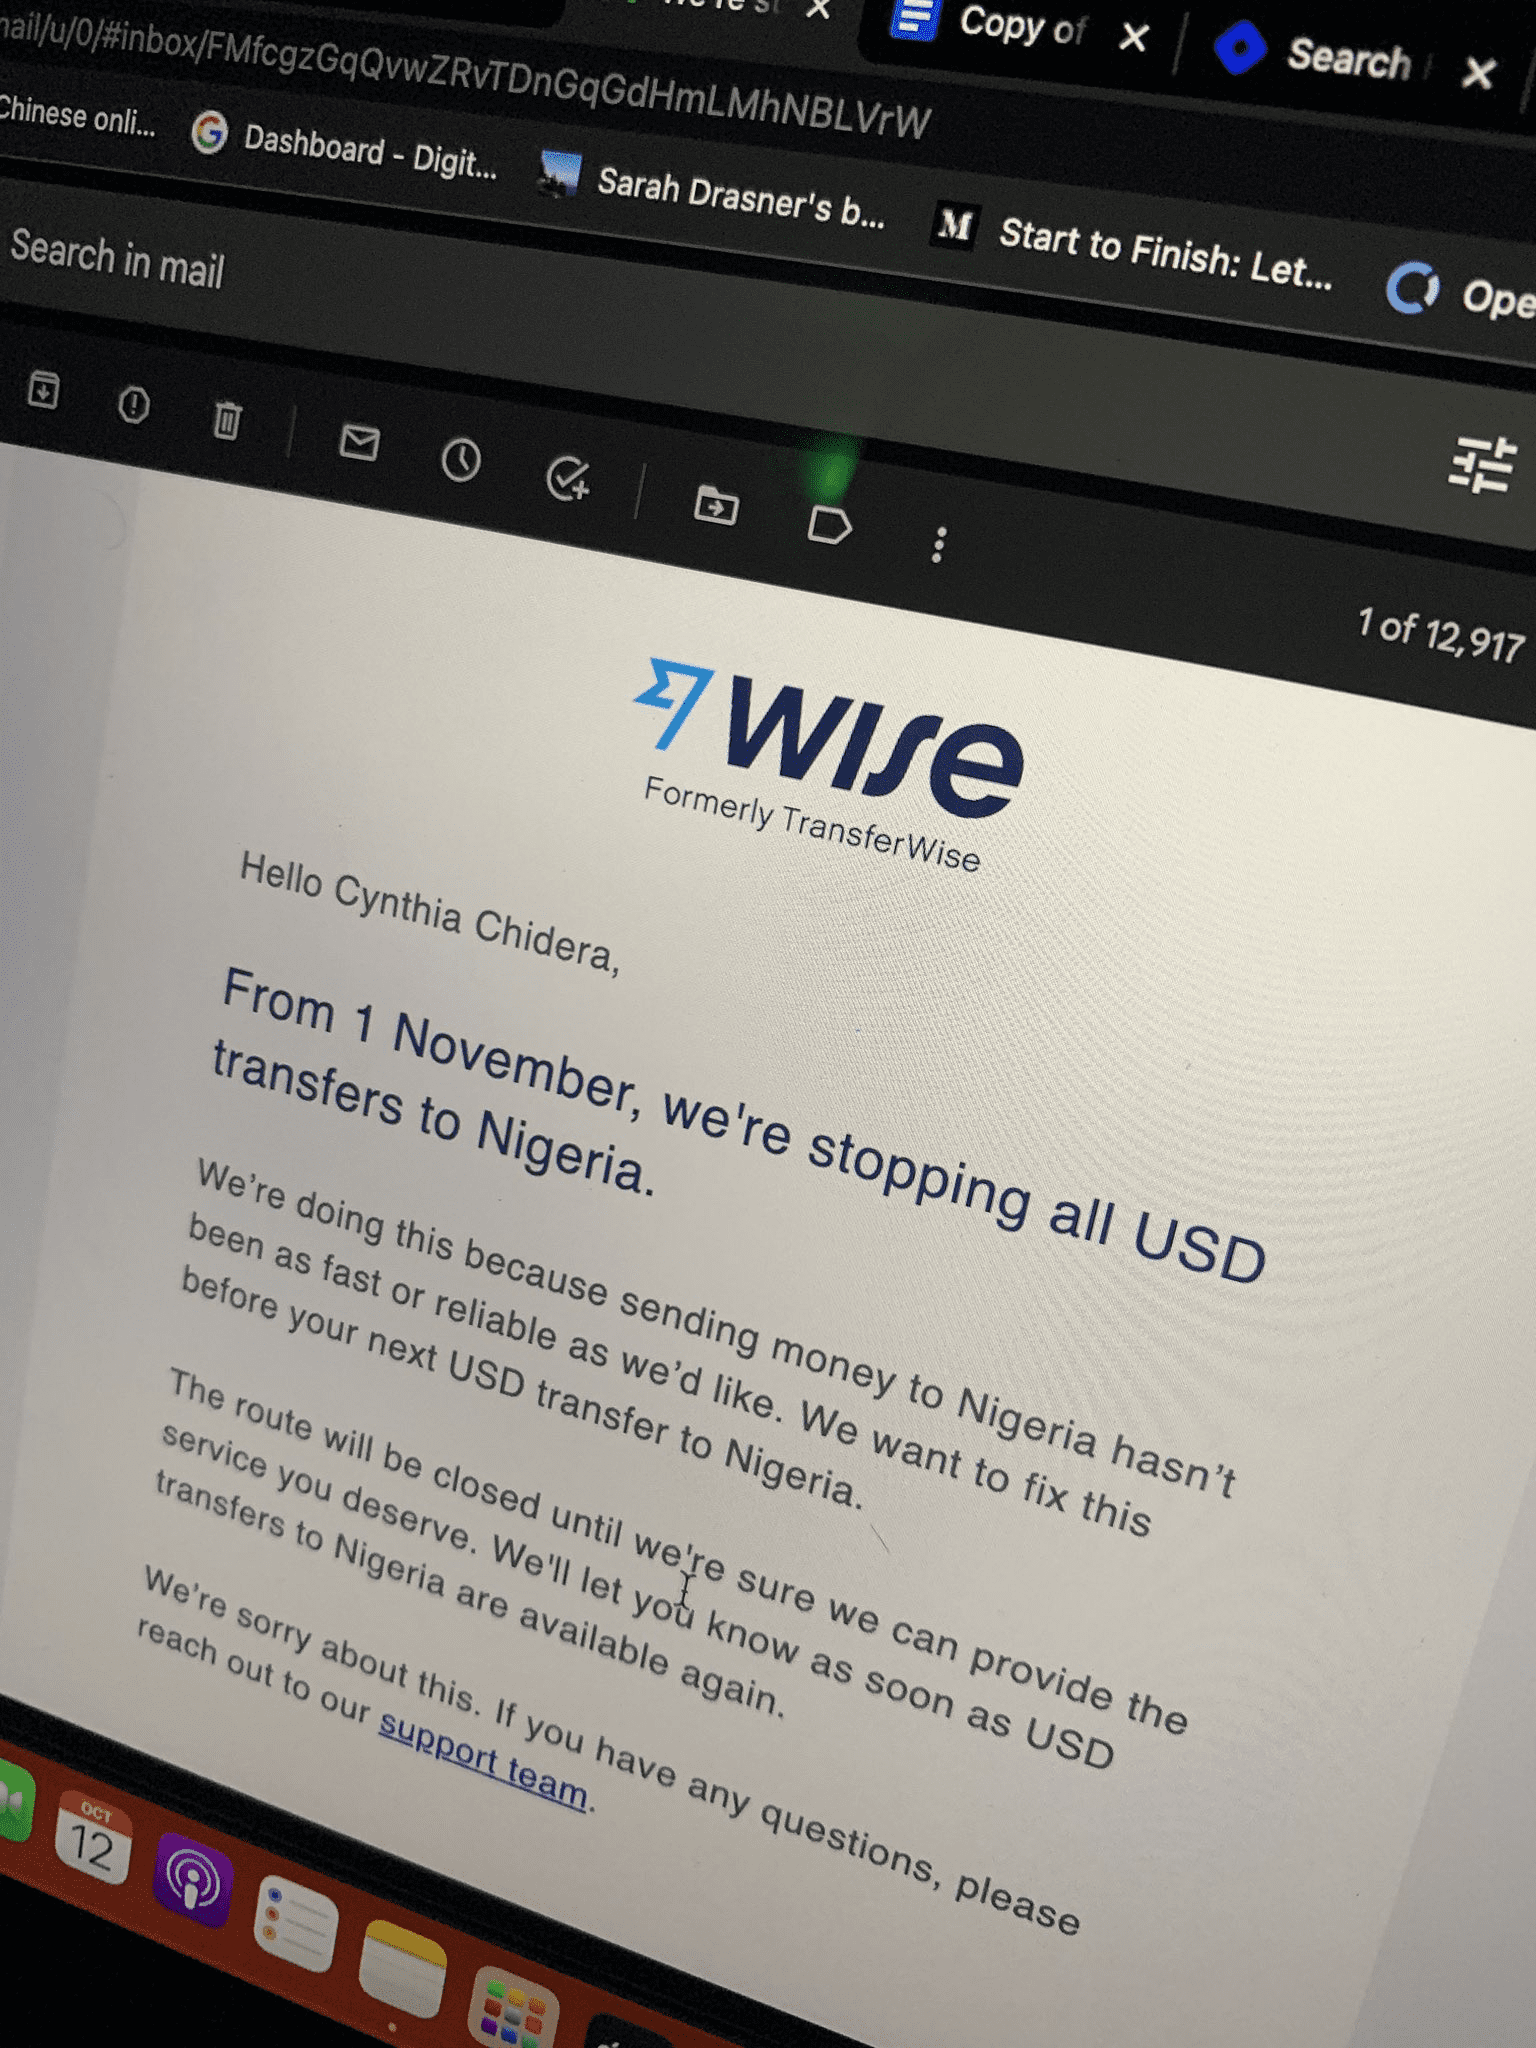 Wise (TransferWise) to suspend USD transactions to Nigeria from November 1st until further notice- Phot Credit: Twitter User